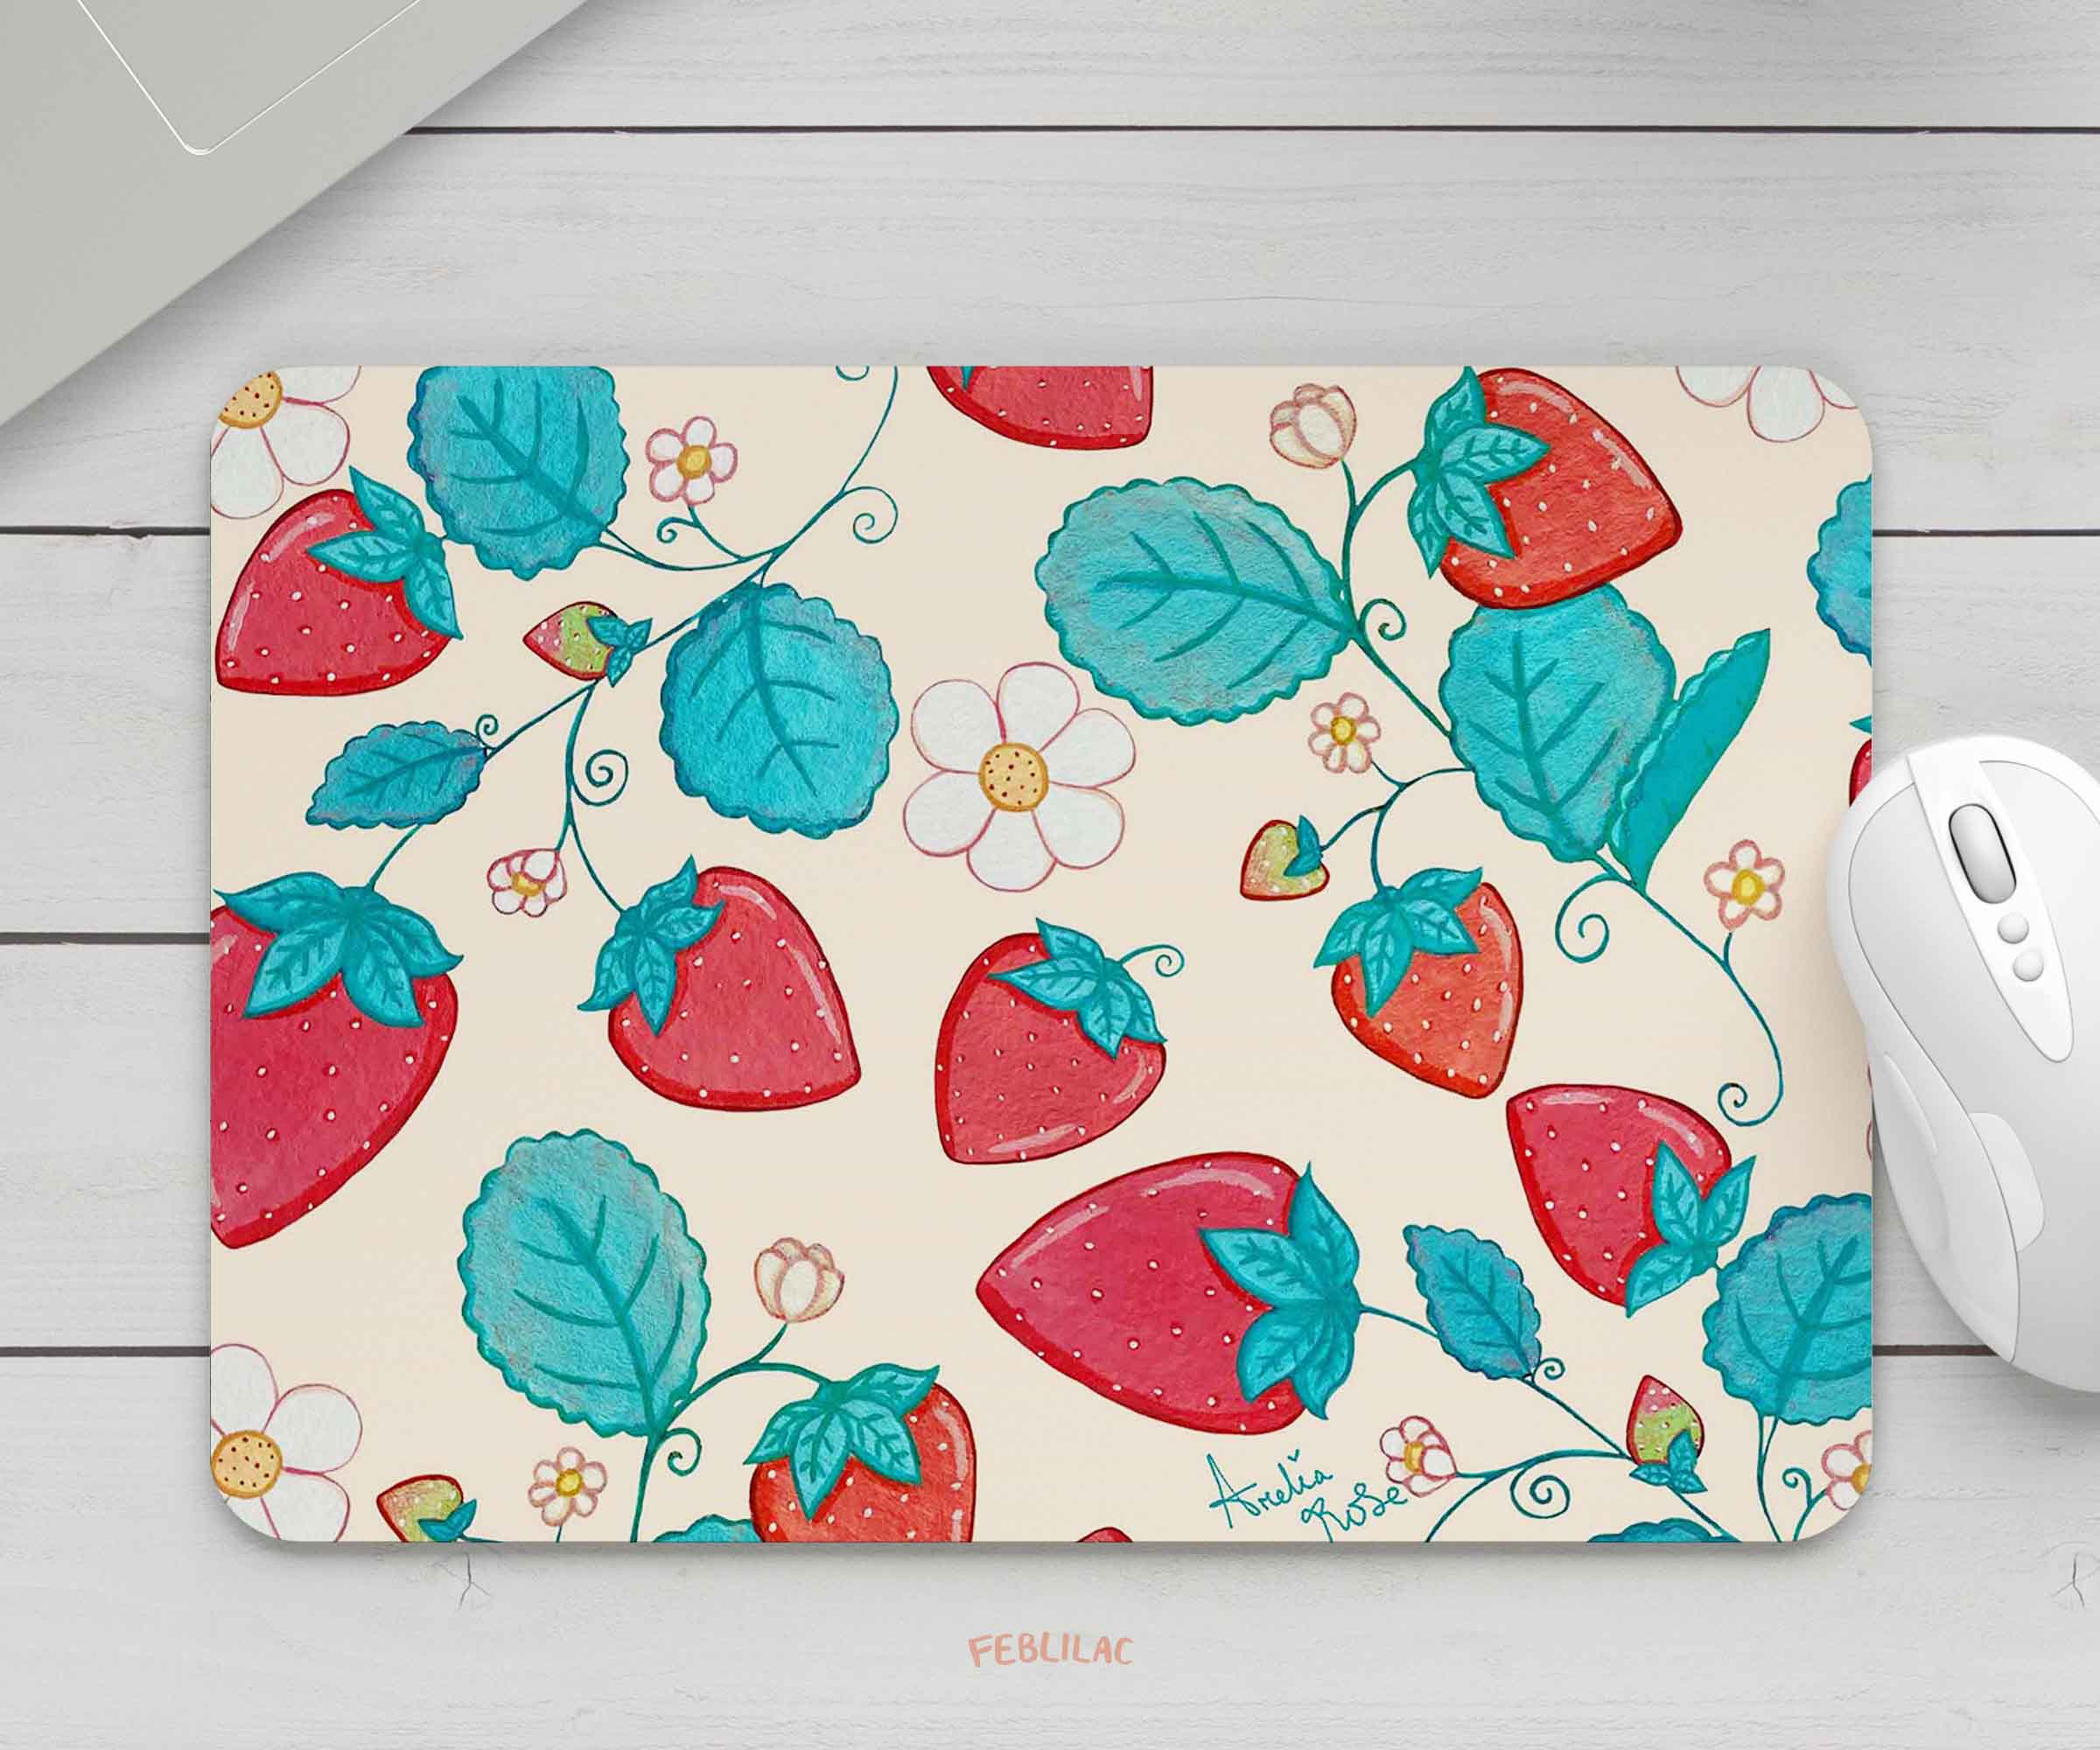 Feblilac Strawberries and Cream Mouse Pad by AmeliaRose Illustrations from UK